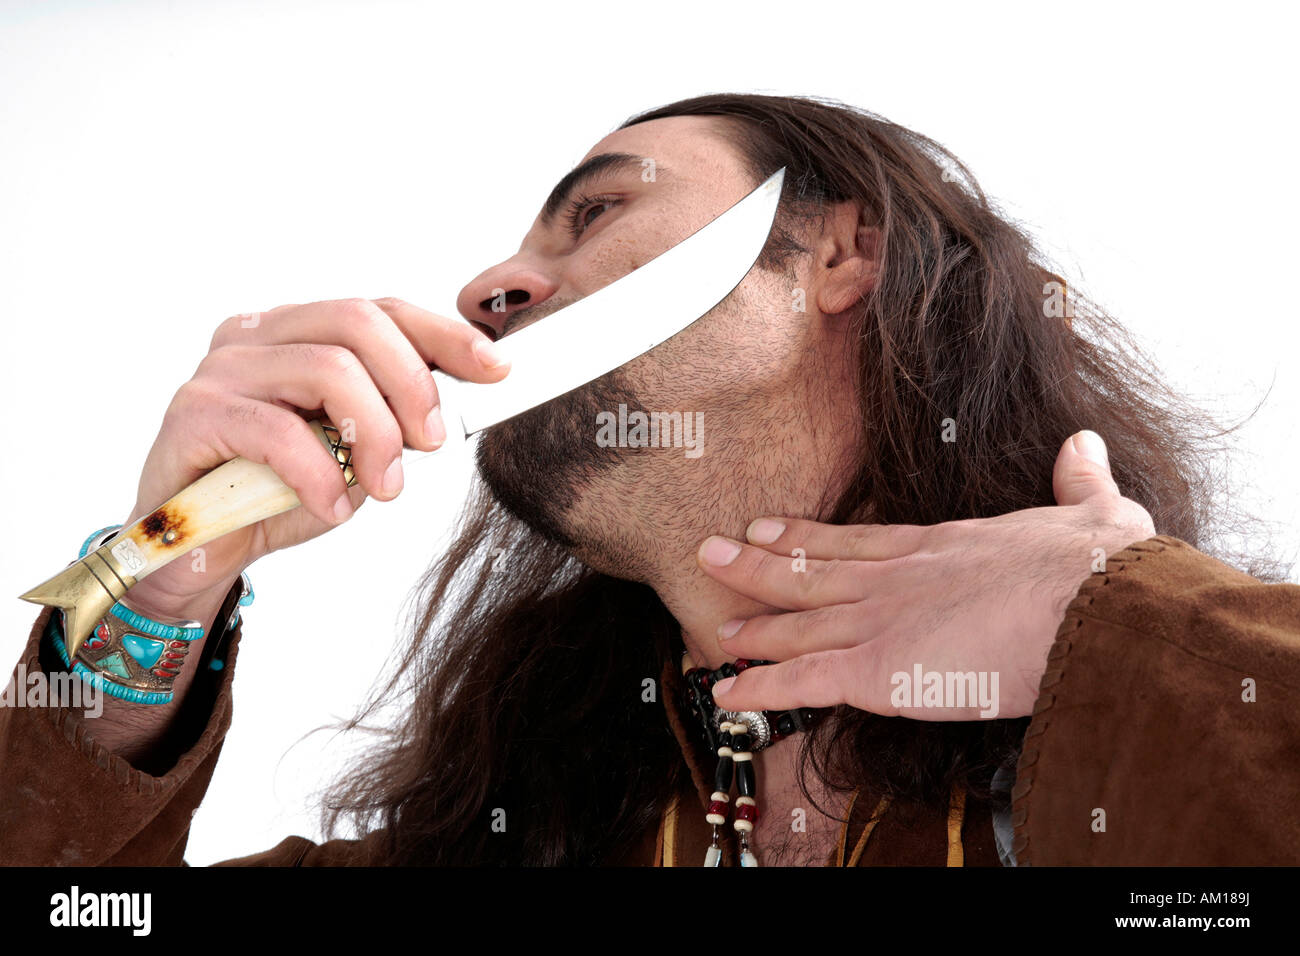 Man wearing indian clothing, shaving with a knife Stock Photo